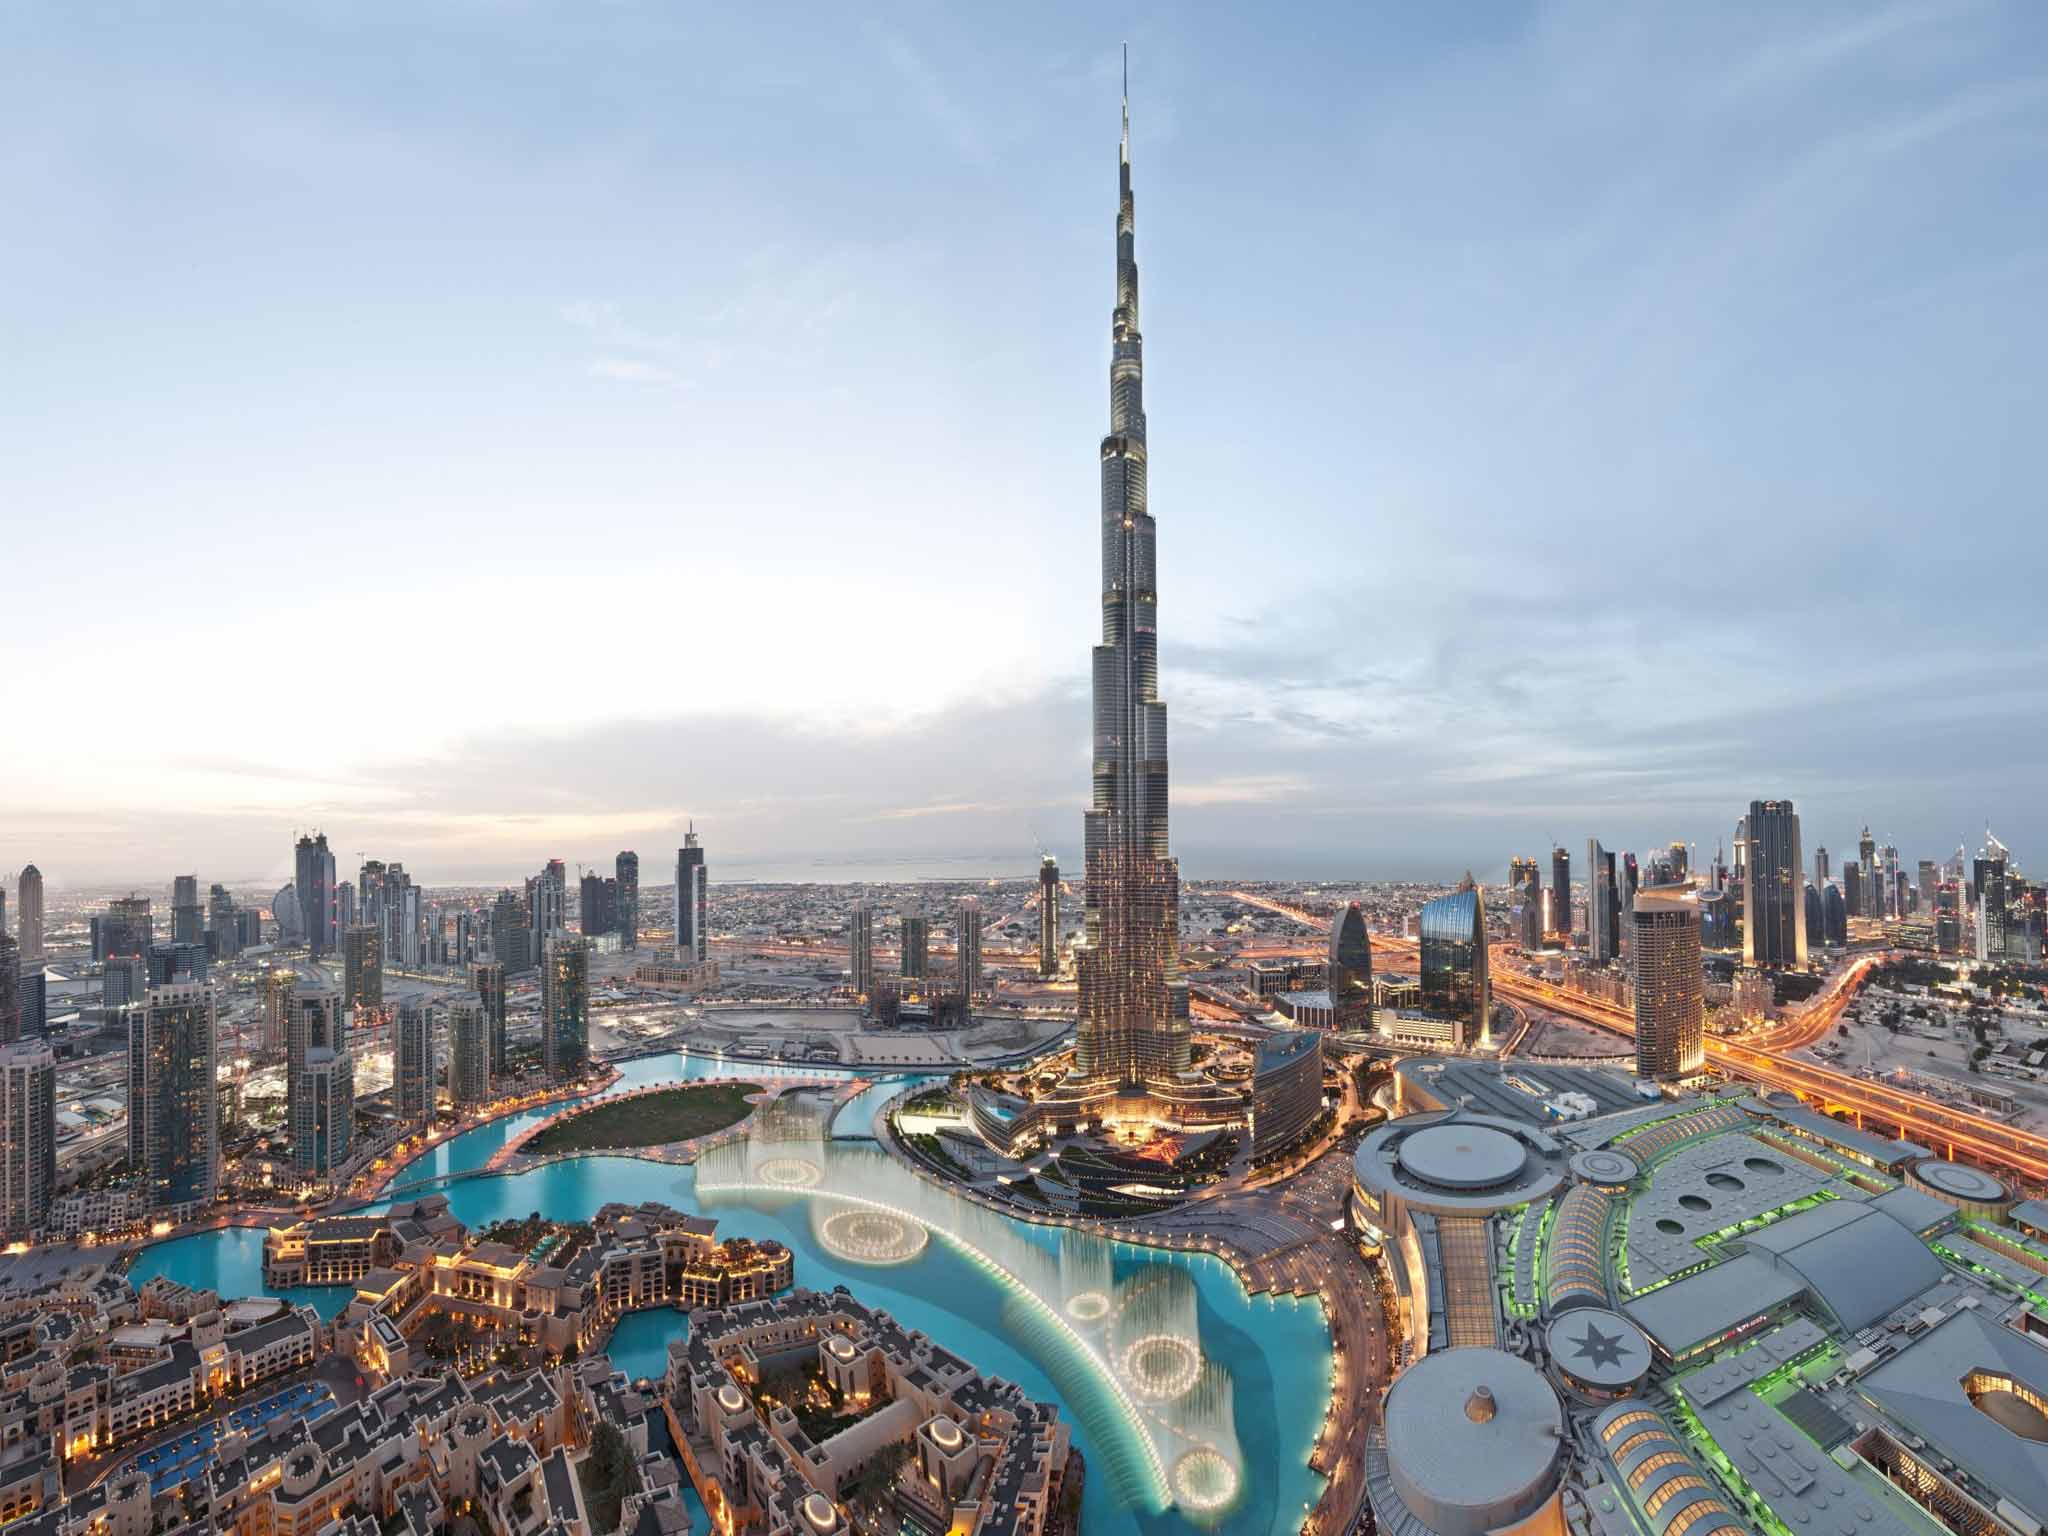 Dubai travel tips: Where to go and what to see in 48 hours | The ...